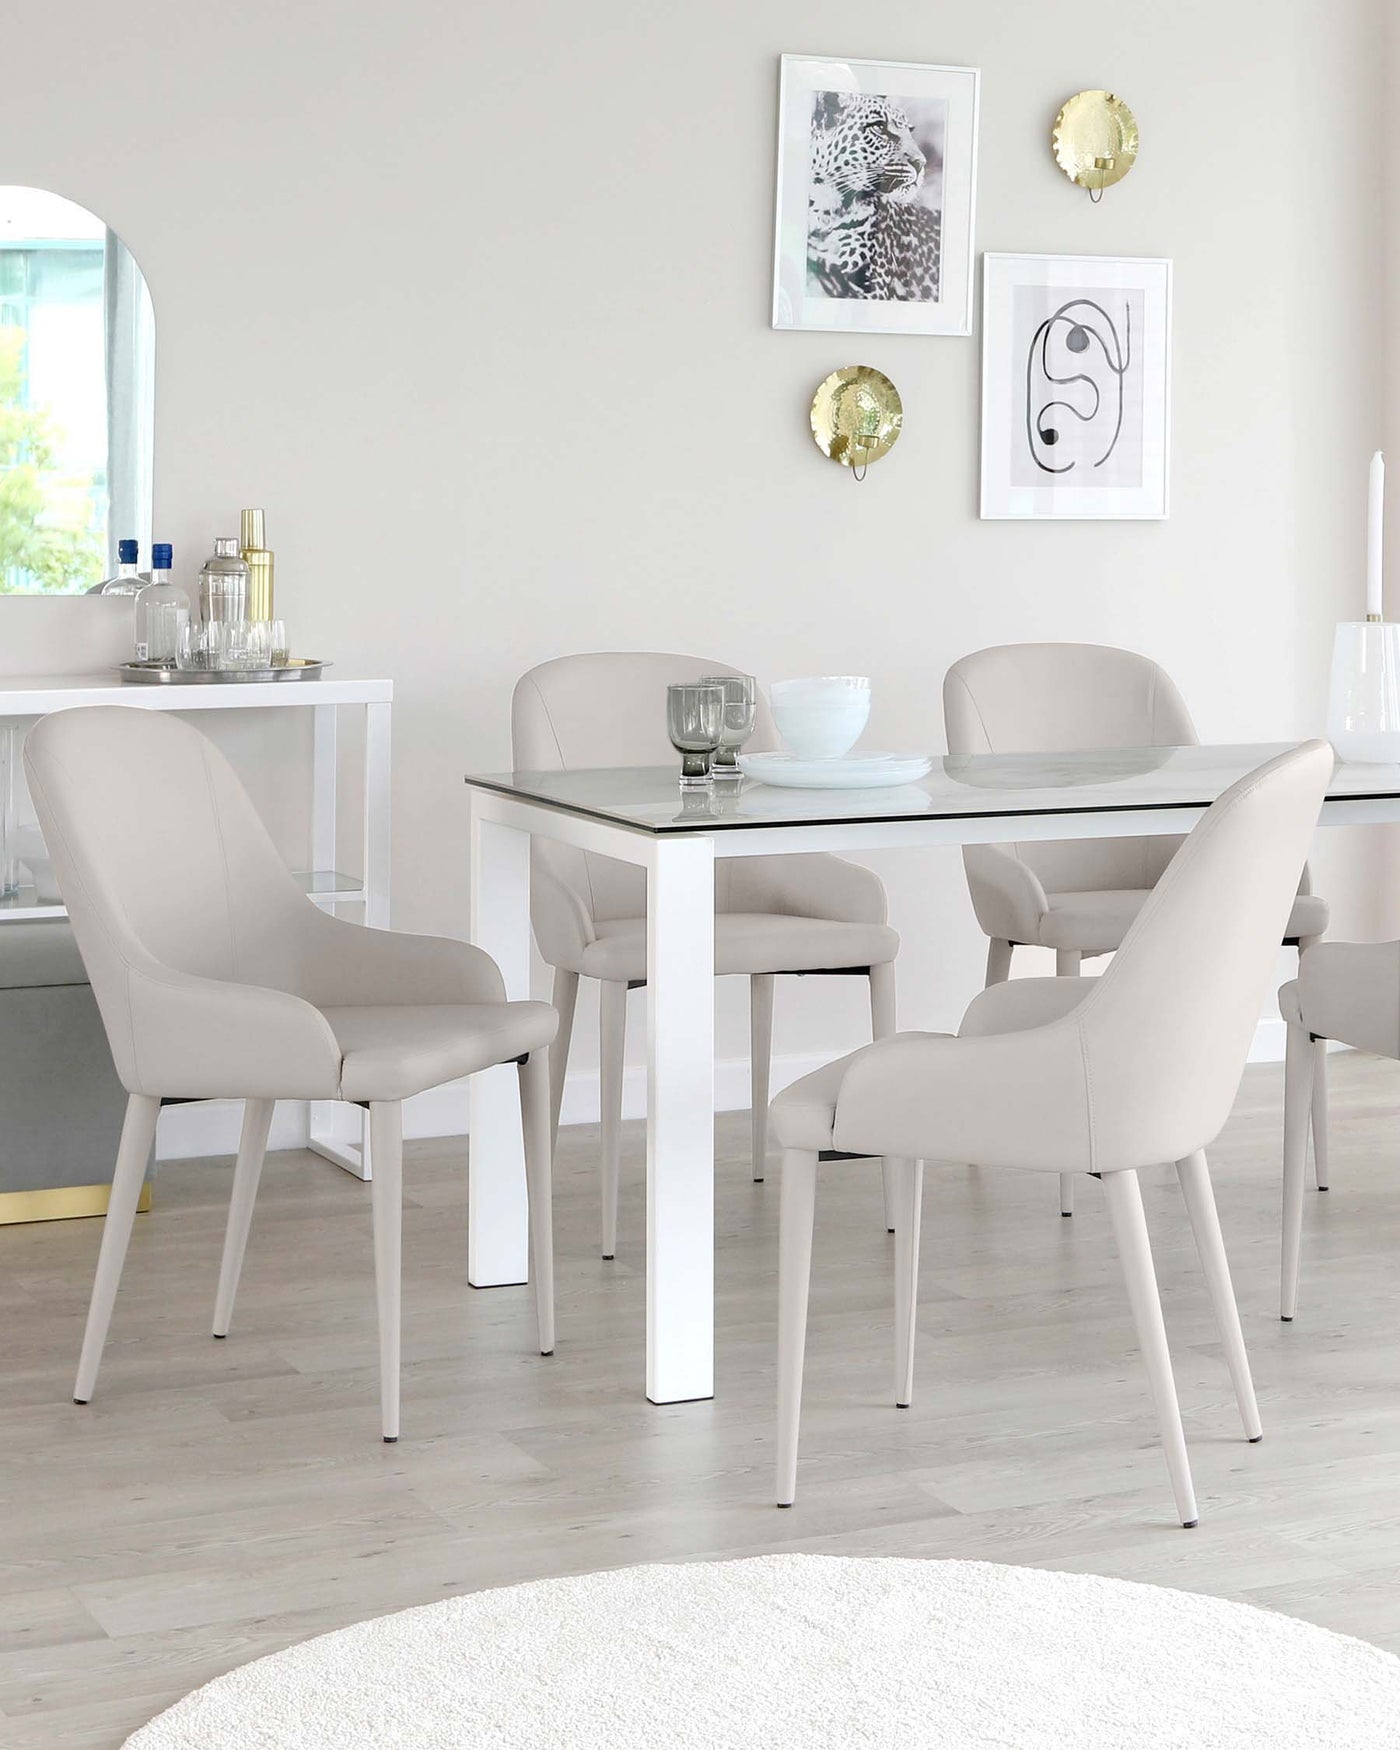 Modern minimalist dining set featuring a white rectangular table with a glass top and sleek metal legs, accompanied by four upholstered chairs in light grey fabric with slender, tapered legs in a matching white finish. A white console table with decorations stands against the wall in the background.